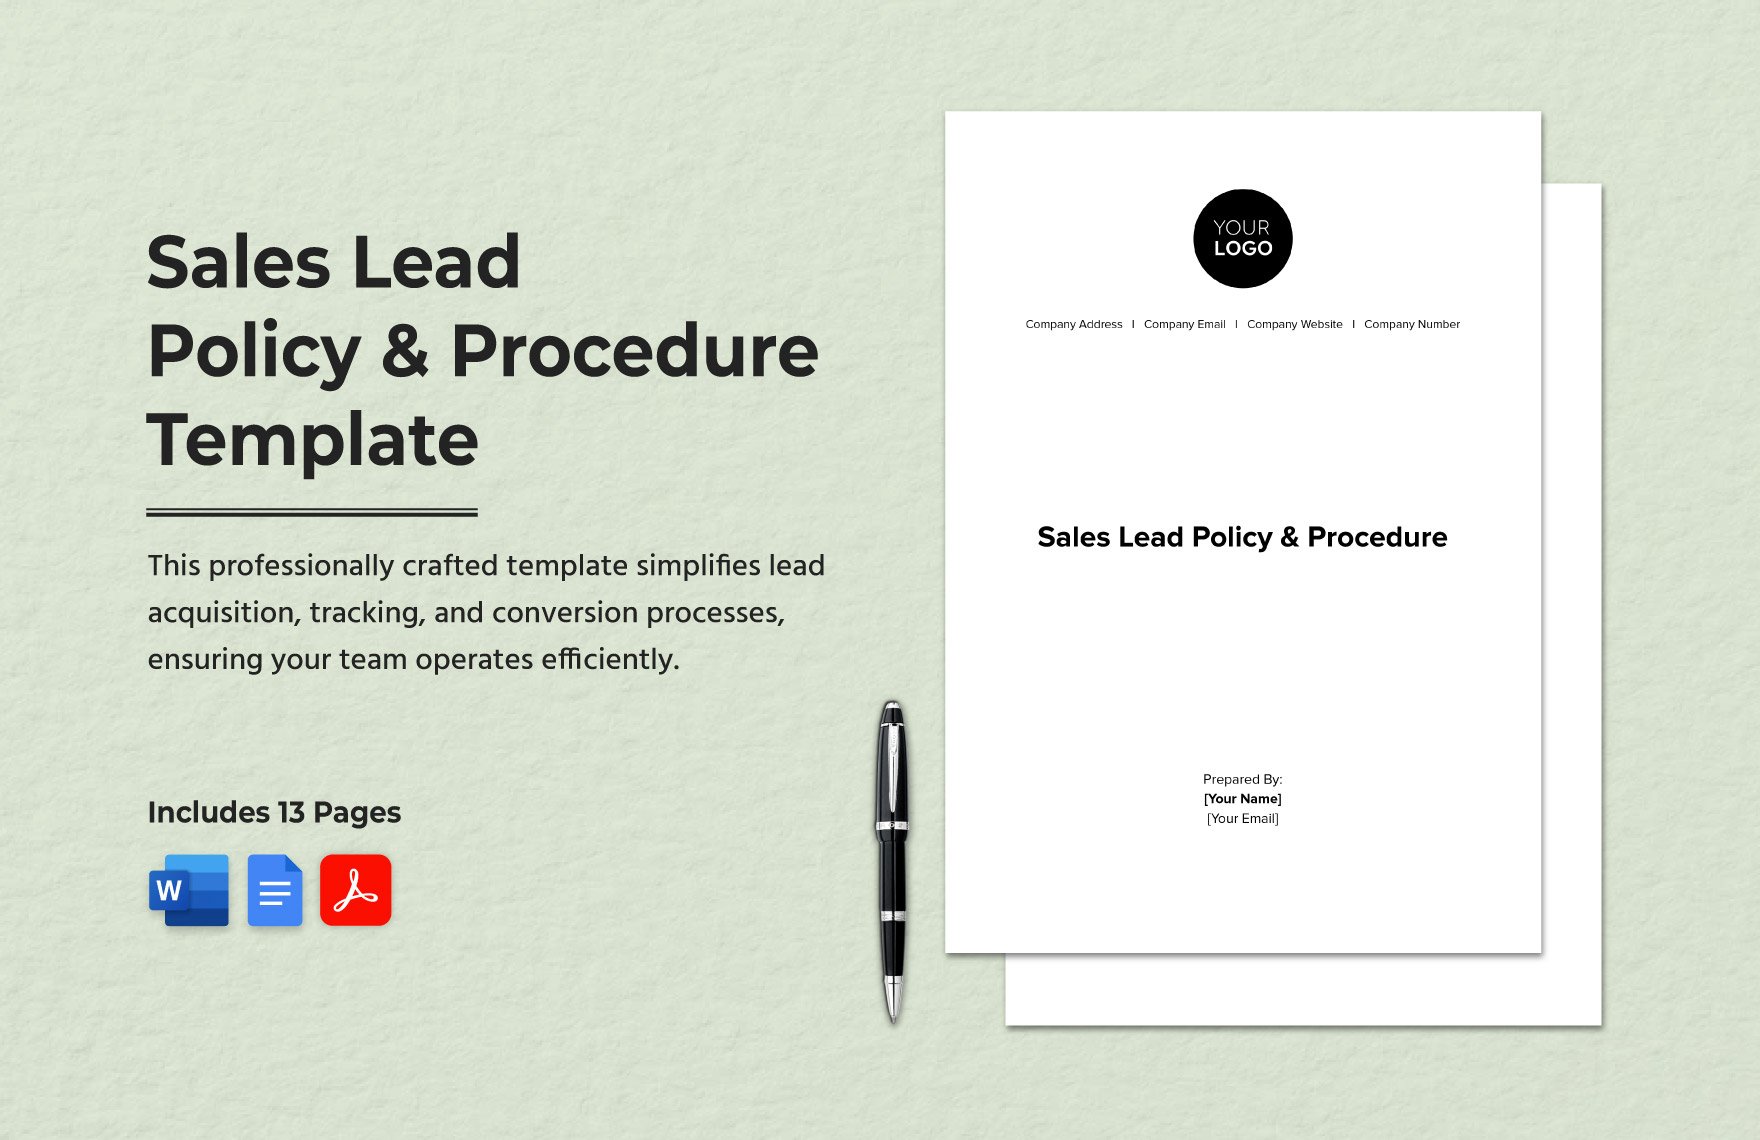 Sales Lead Policy & Procedure Template in Word, Google Docs, PDF